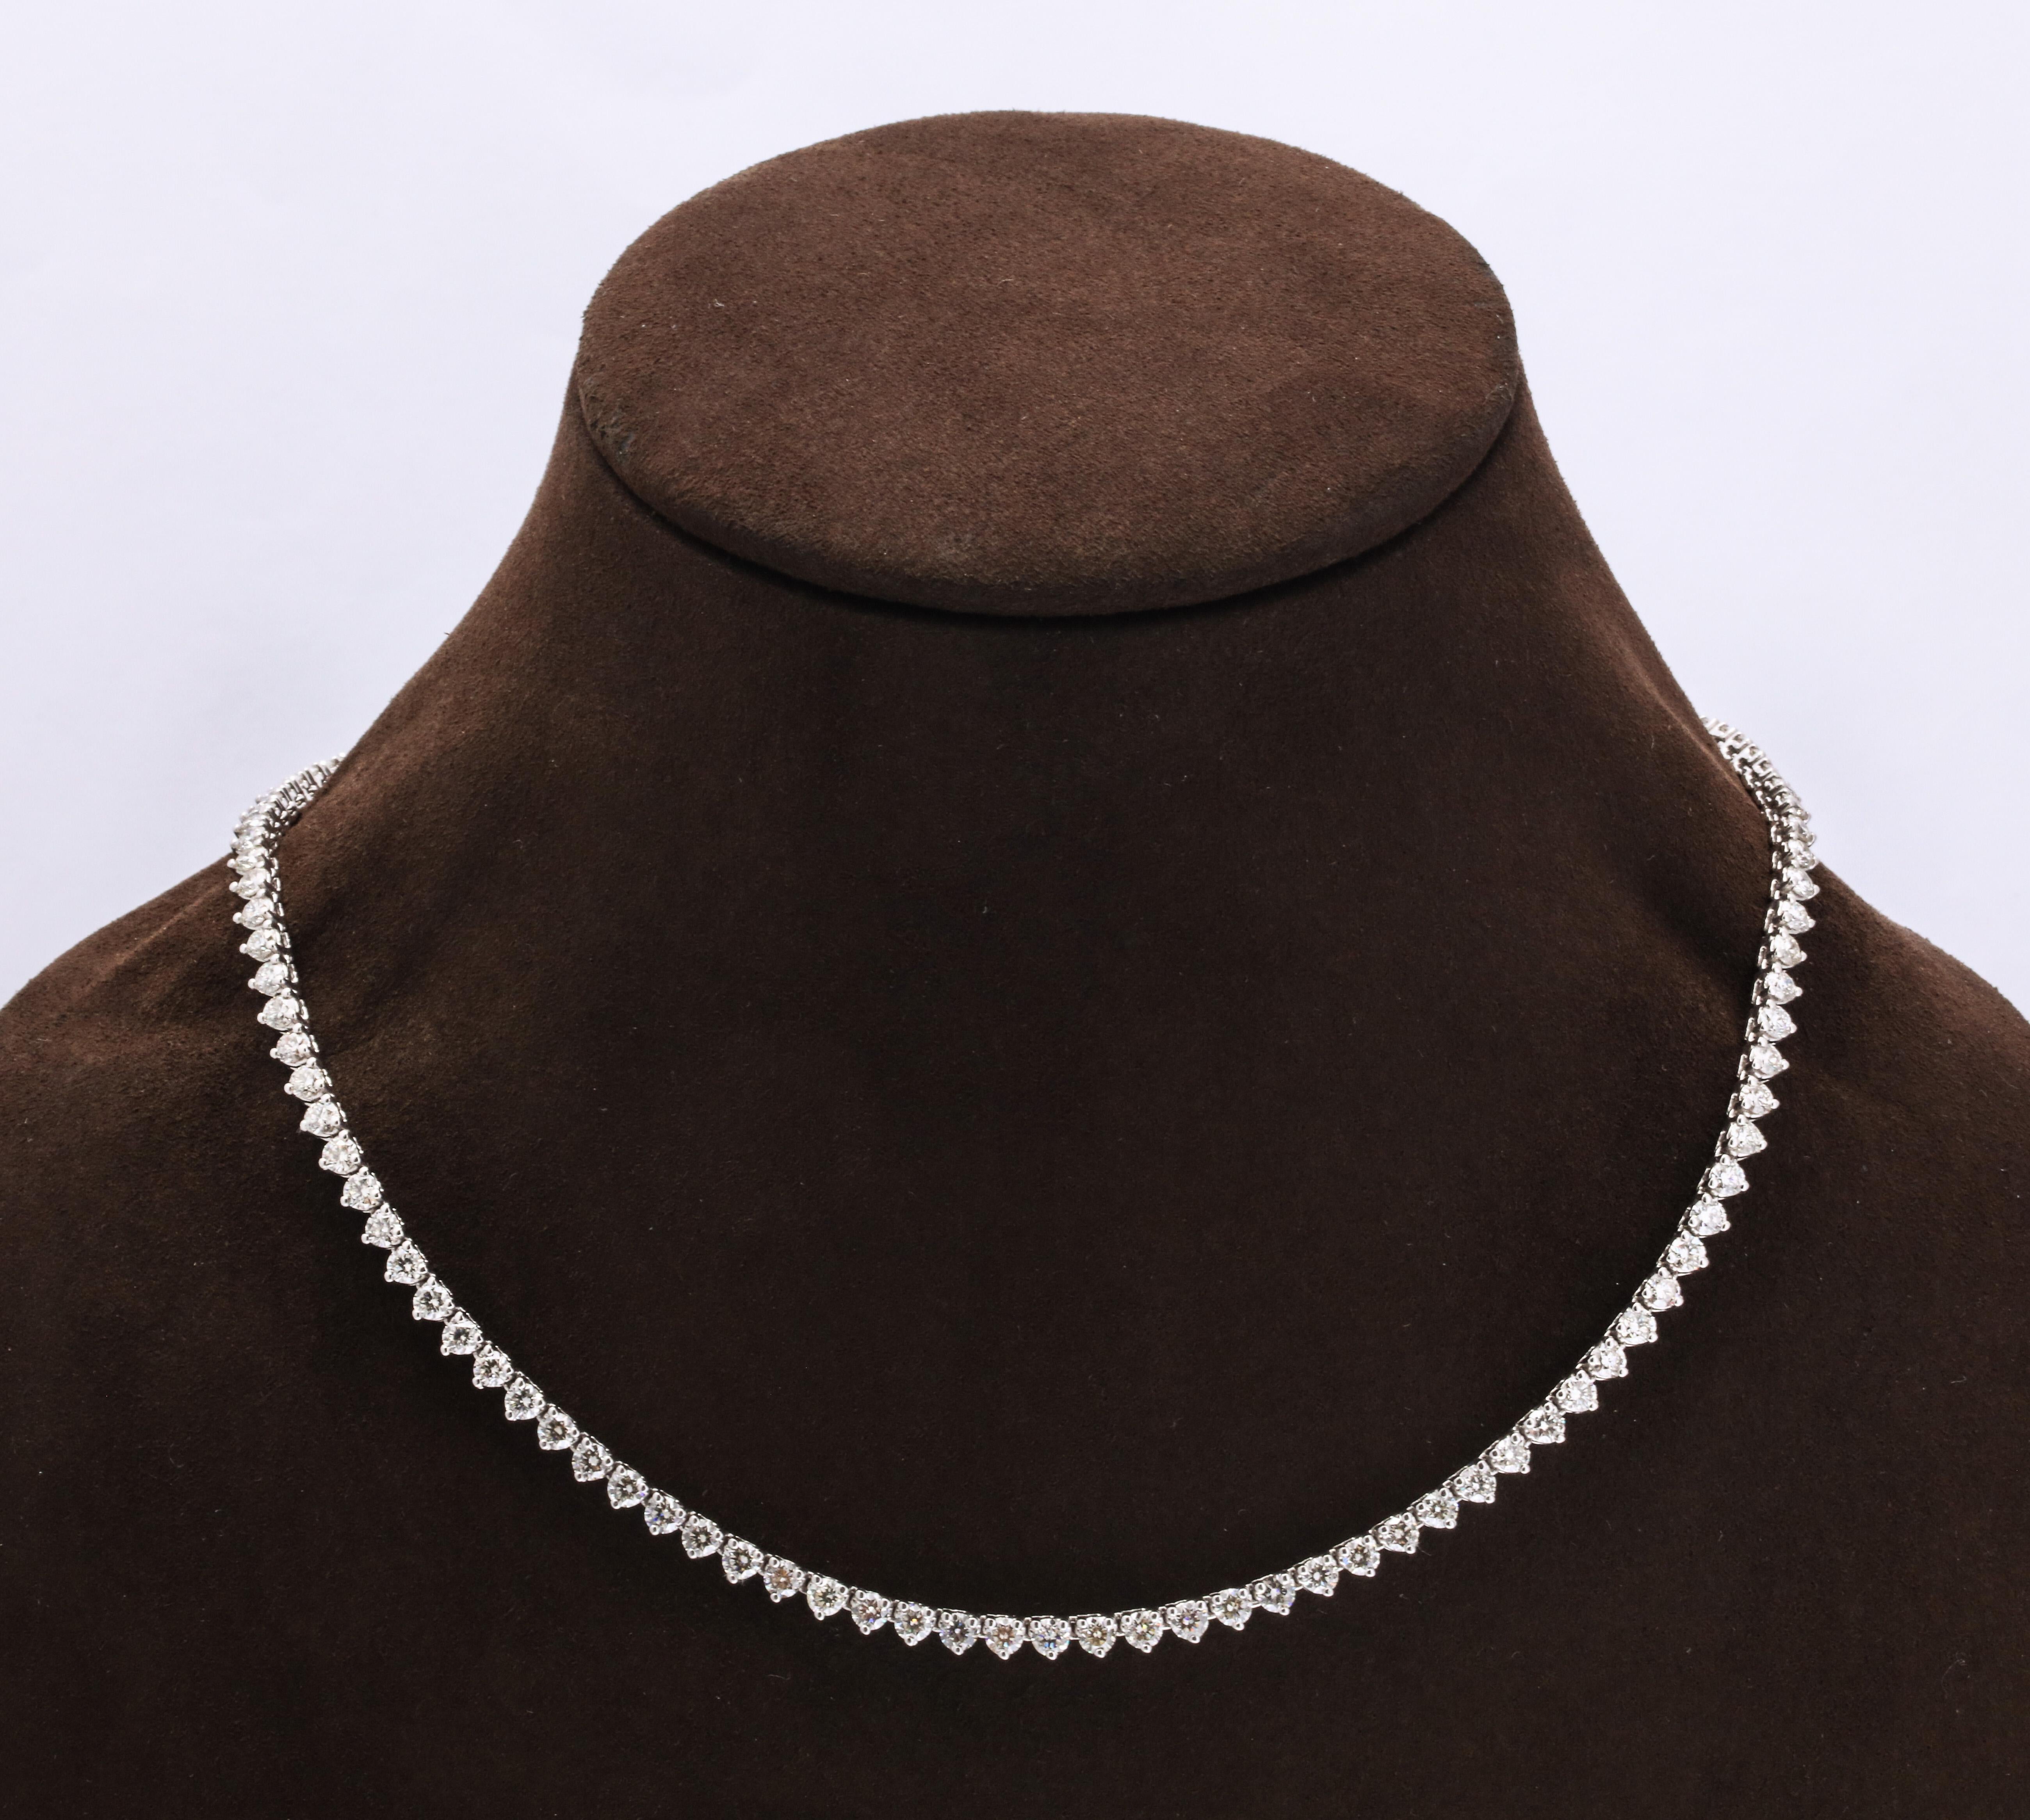 
The perfect tennis necklace!

11.12 carats of white round brilliant cut diamonds set in white gold. 

16 inch length that can easily be adjusted. 

The ideal diamond size, this necklace can be dressed up or down. 